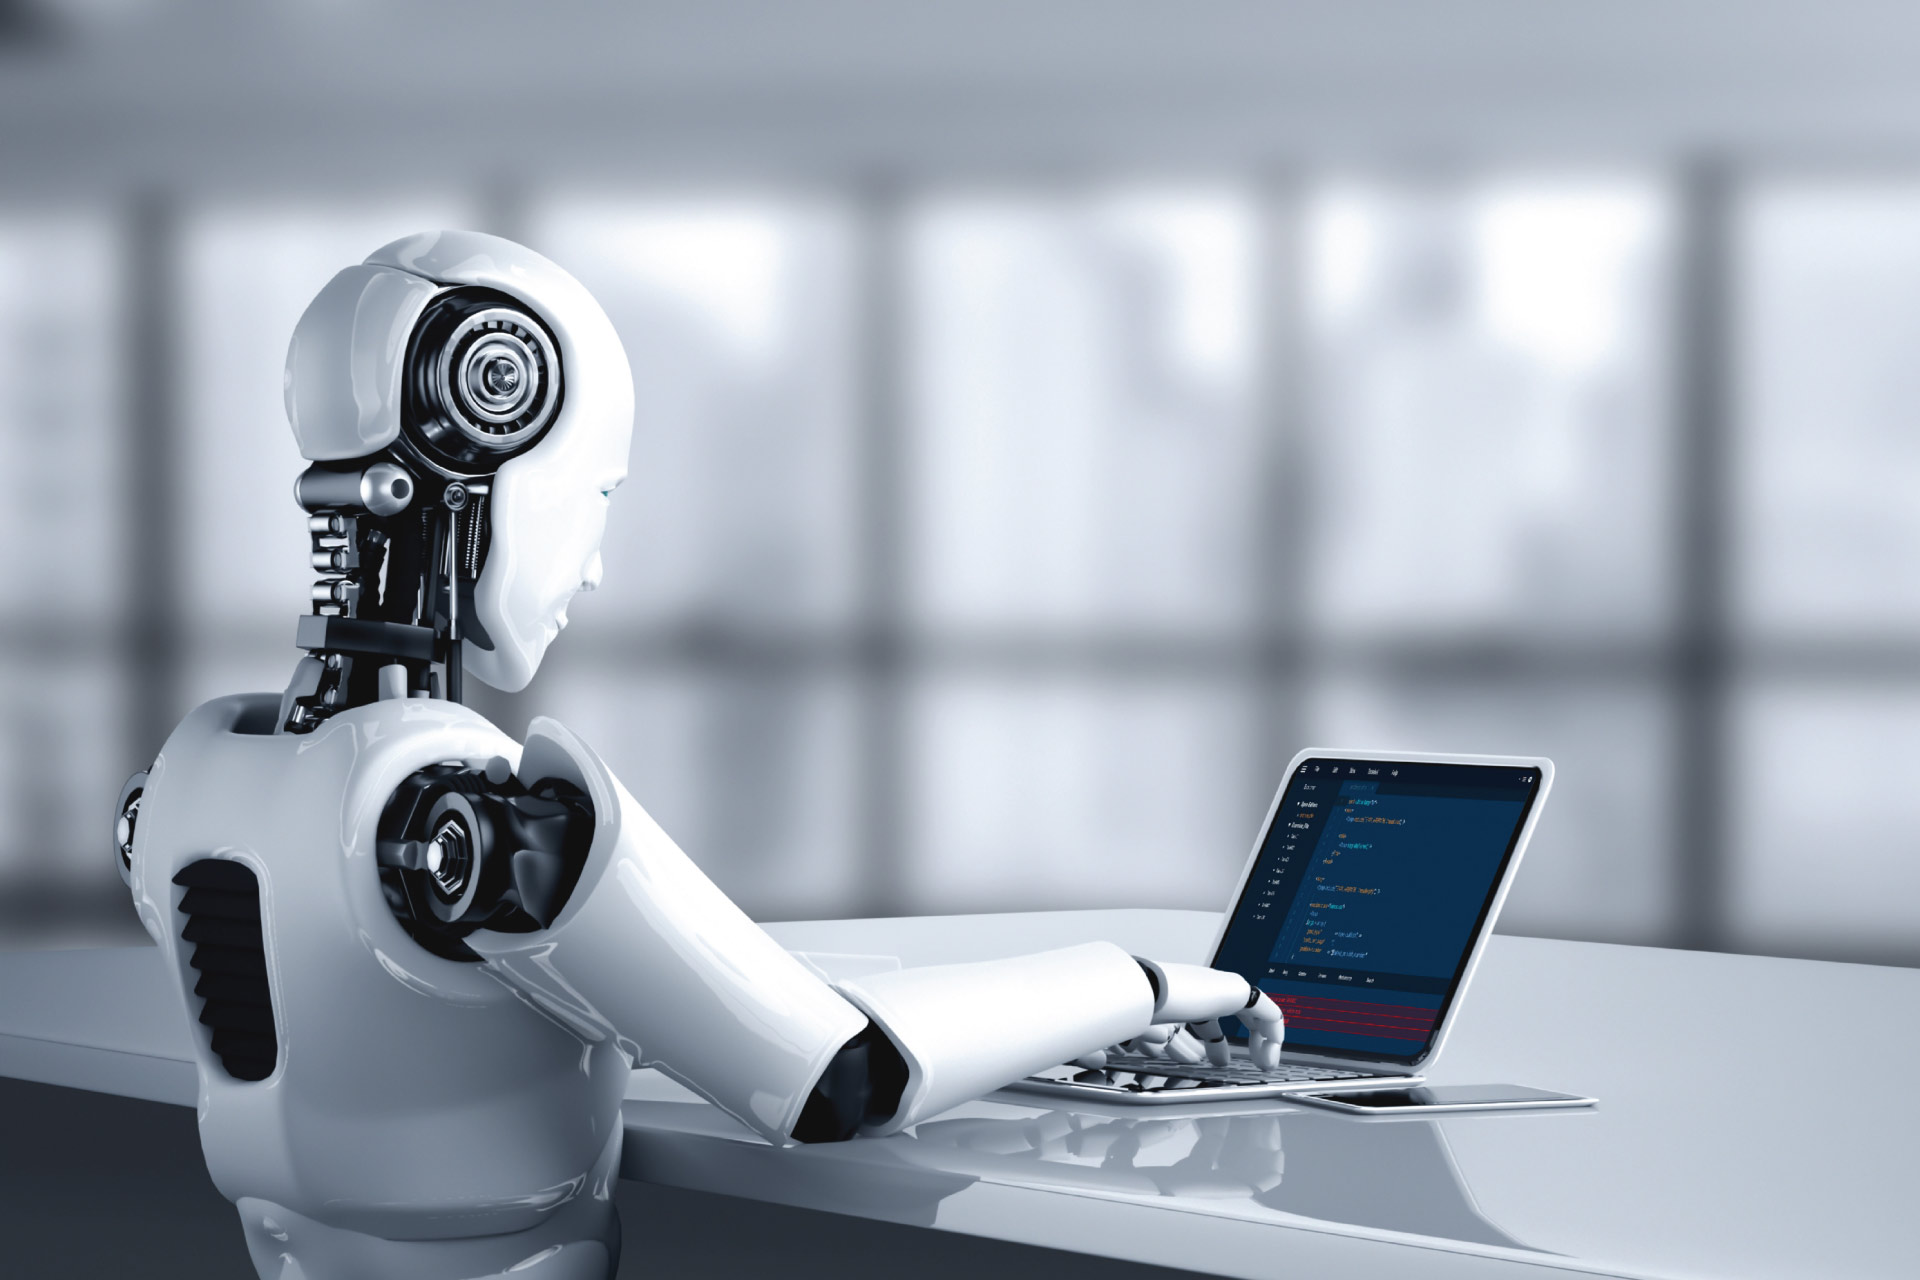 Robot coding on a laptop | AI and the Future of Work - ALX Global